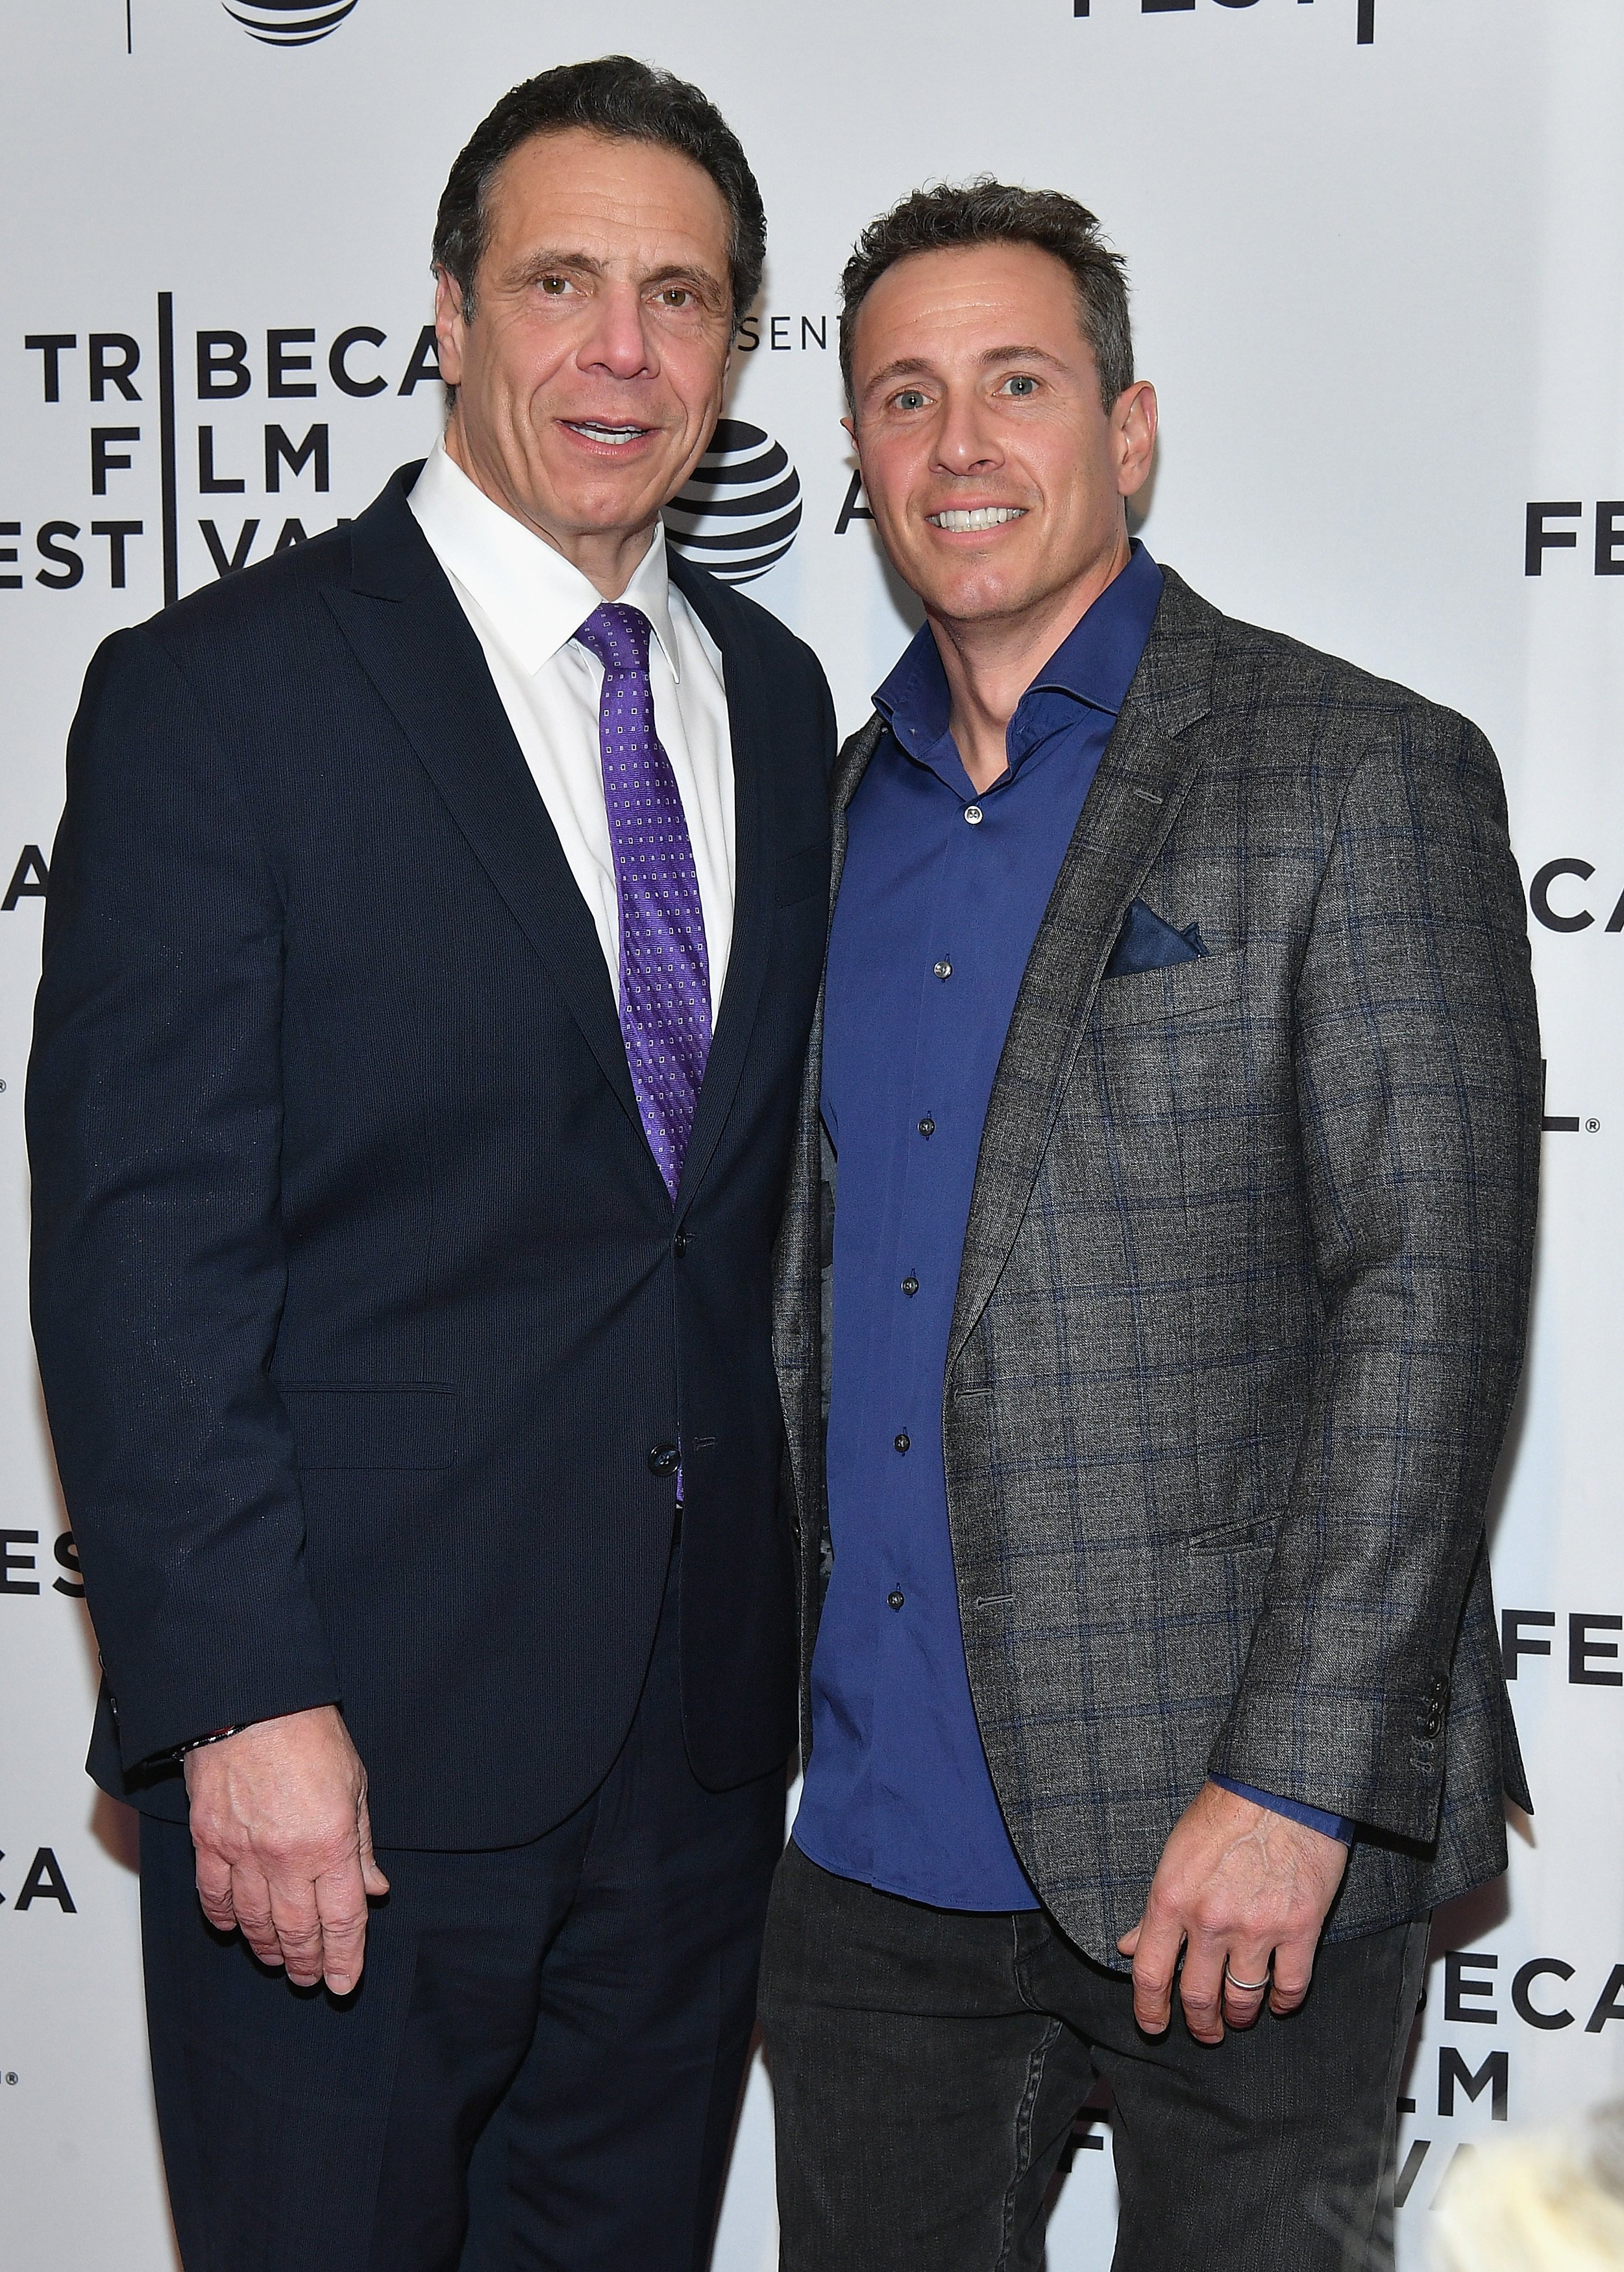 Following their spectacular falls from grace in 2020, former New York governor Andrew Cuomo (left) and former CNN anchor Chris Cuomo – pictured in April 2018 – are making moves in their respective fields. Photo: Getty Images